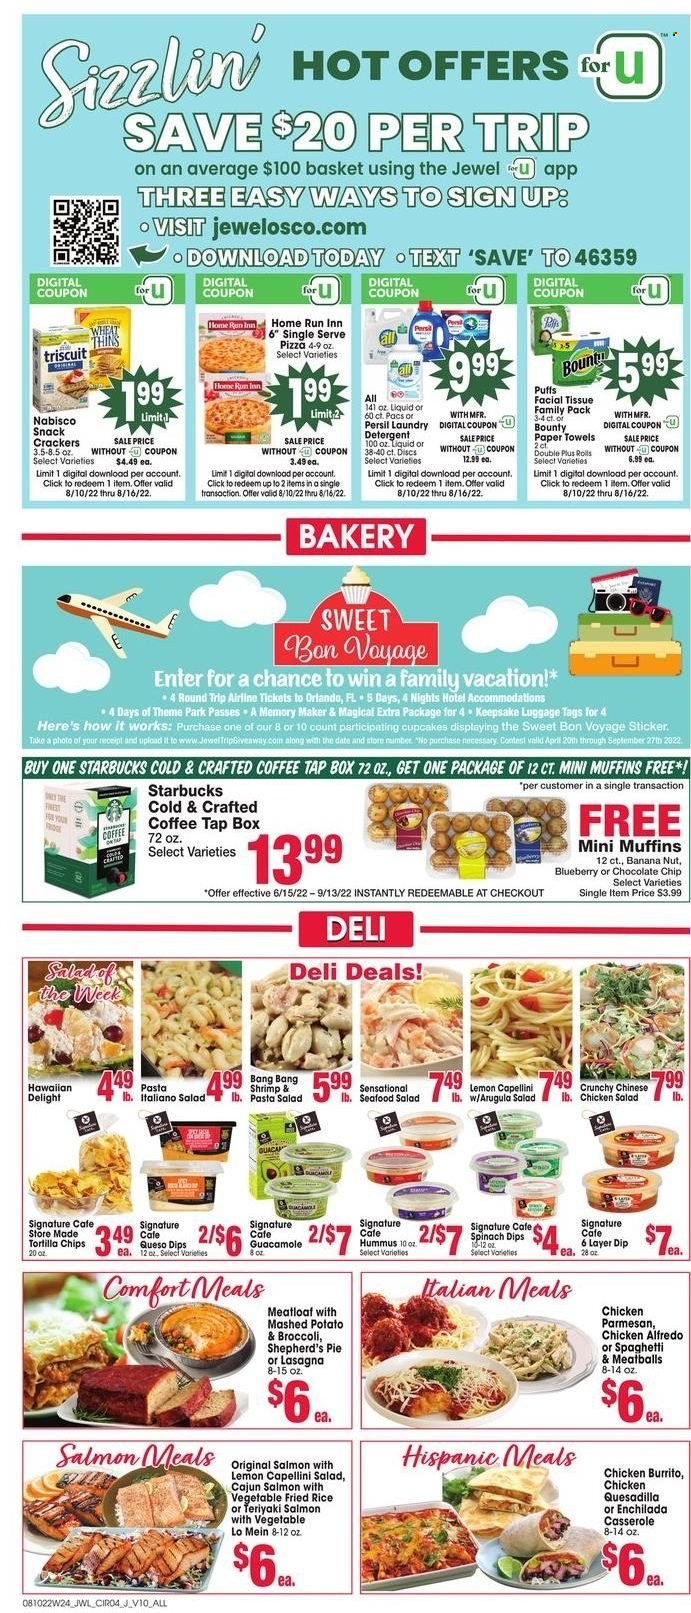 thumbnail - Jewel Osco Flyer - 08/10/2022 - 08/16/2022 - Sales products - pie, cupcake, puffs, muffin, arugula, broccoli, salmon, seafood, shrimps, pizza, meatballs, pasta, meatloaf, burrito, hummus, guacamole, seafood salad, pasta salad, chicken salad, dip, spinach dip, snack, Bounty, crackers, tortilla chips, chips, Thins, tea, coffee, Starbucks, tissues, kitchen towels, paper towels, detergent, Persil, laundry detergent, casserole, sticker, luggage. Page 4.